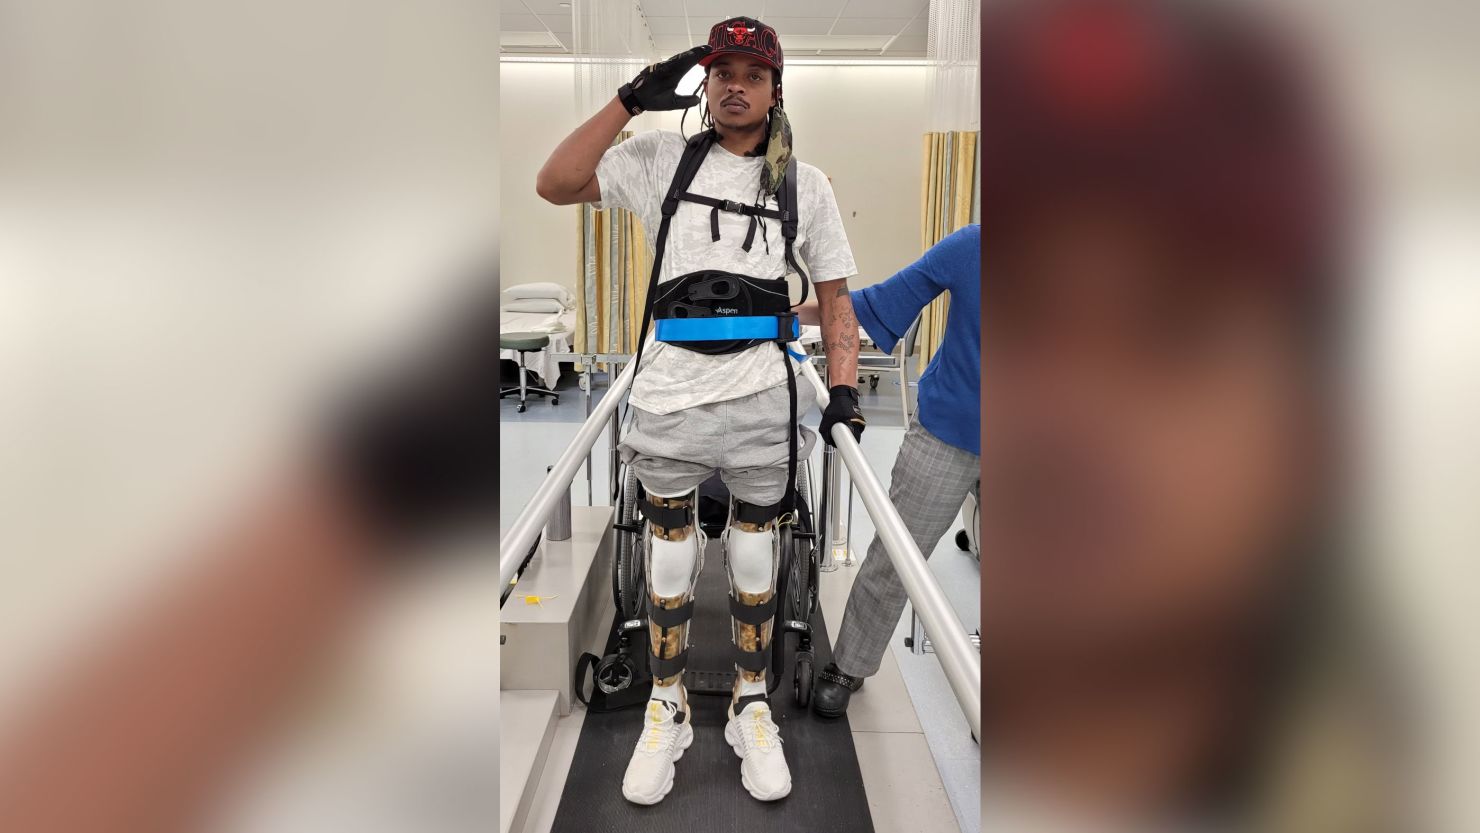 Jacob Blake fully standing on heavily braced legs during a mid-August 2021 physical rehabilitation session